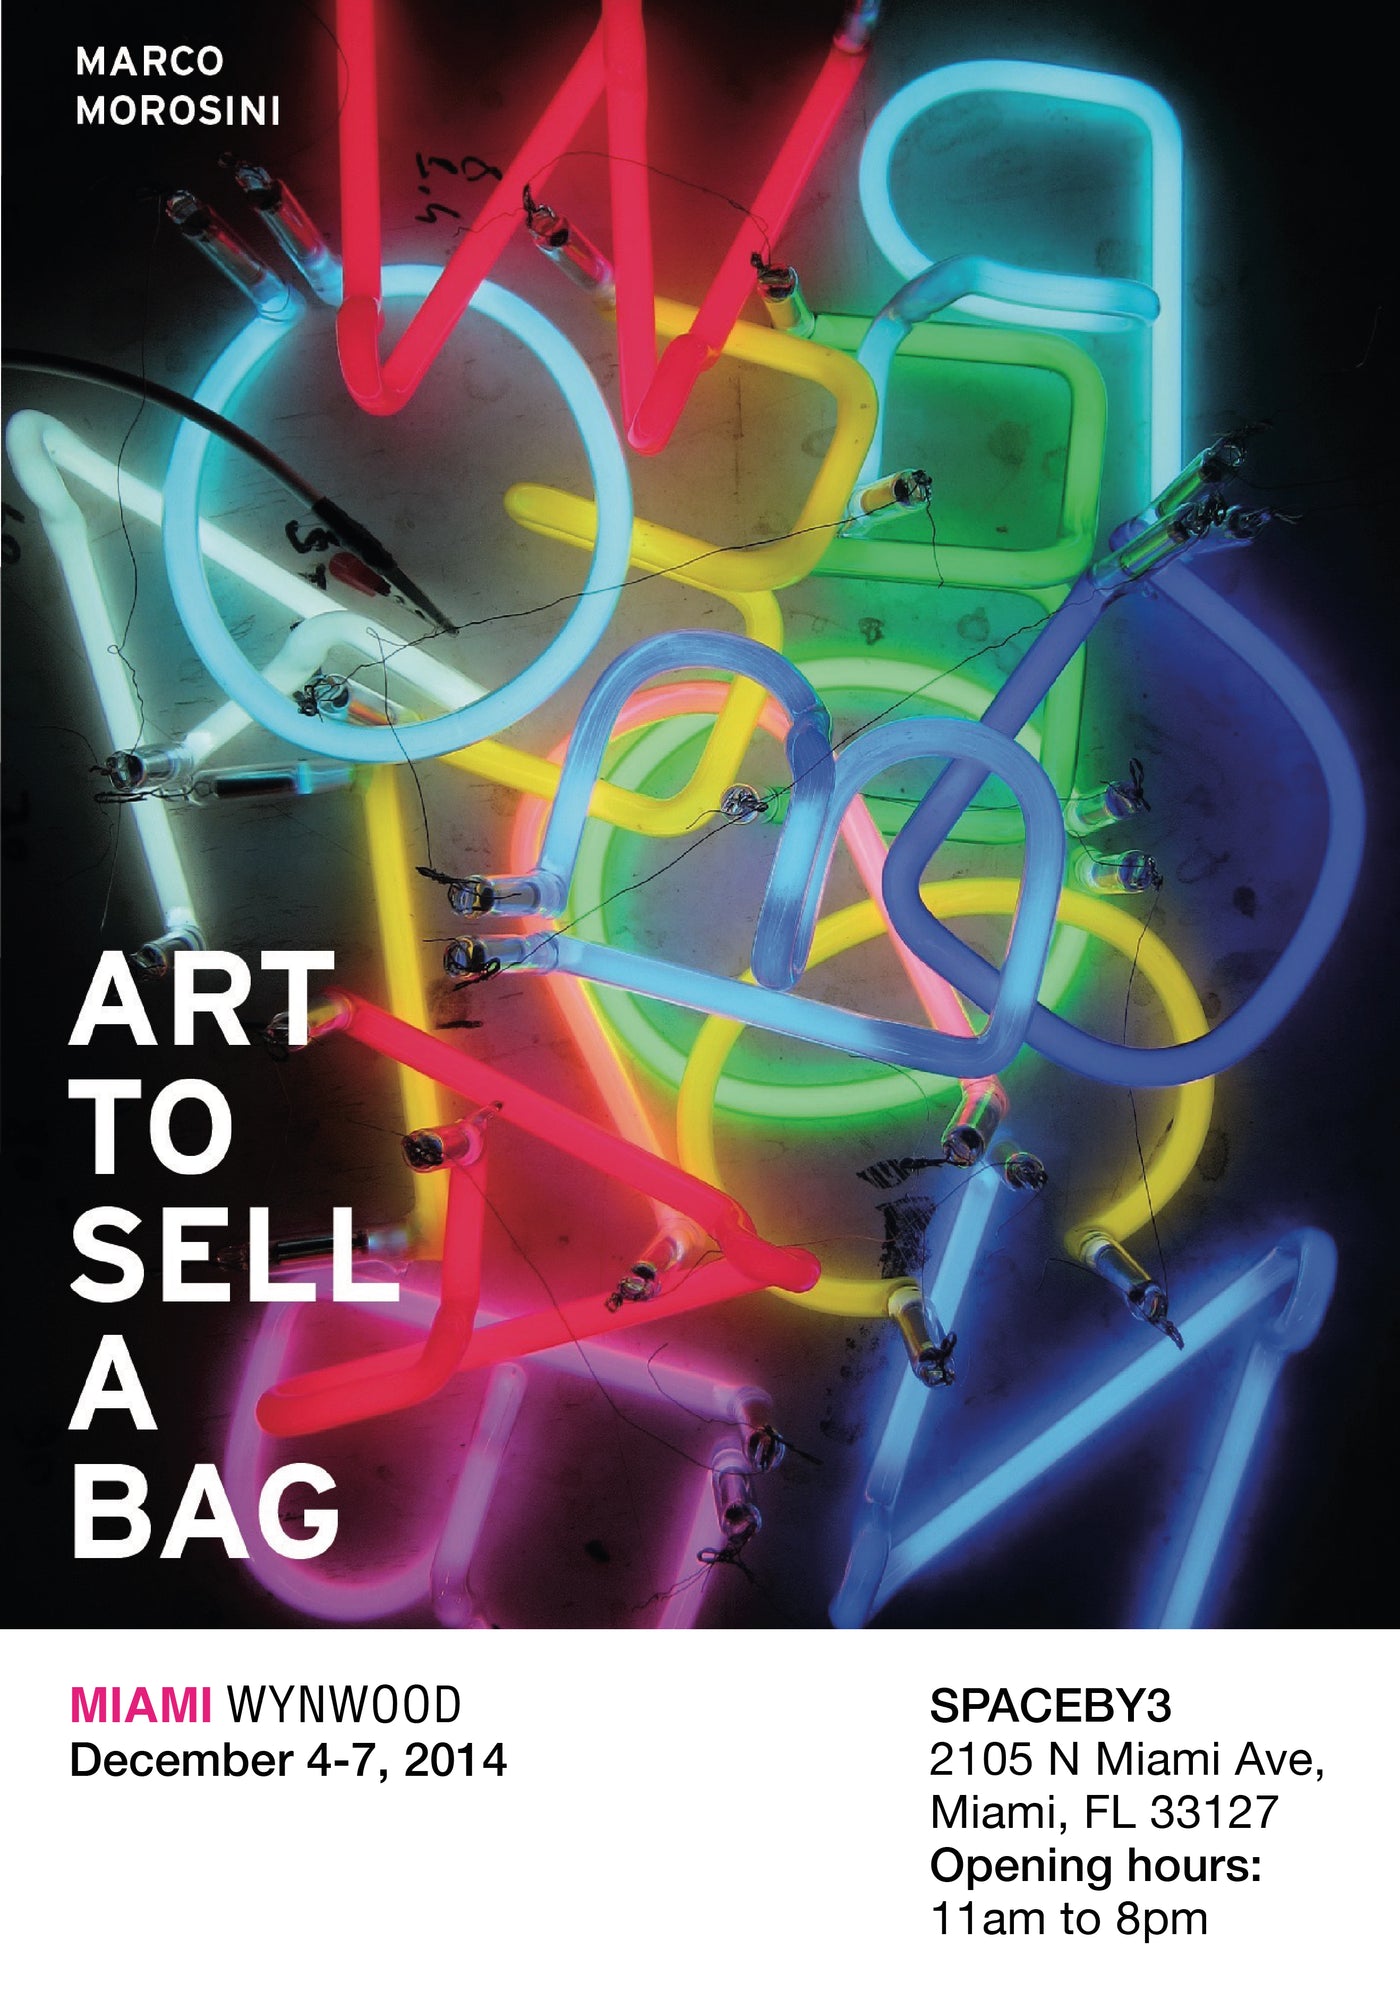 The Art of Selling a Bag